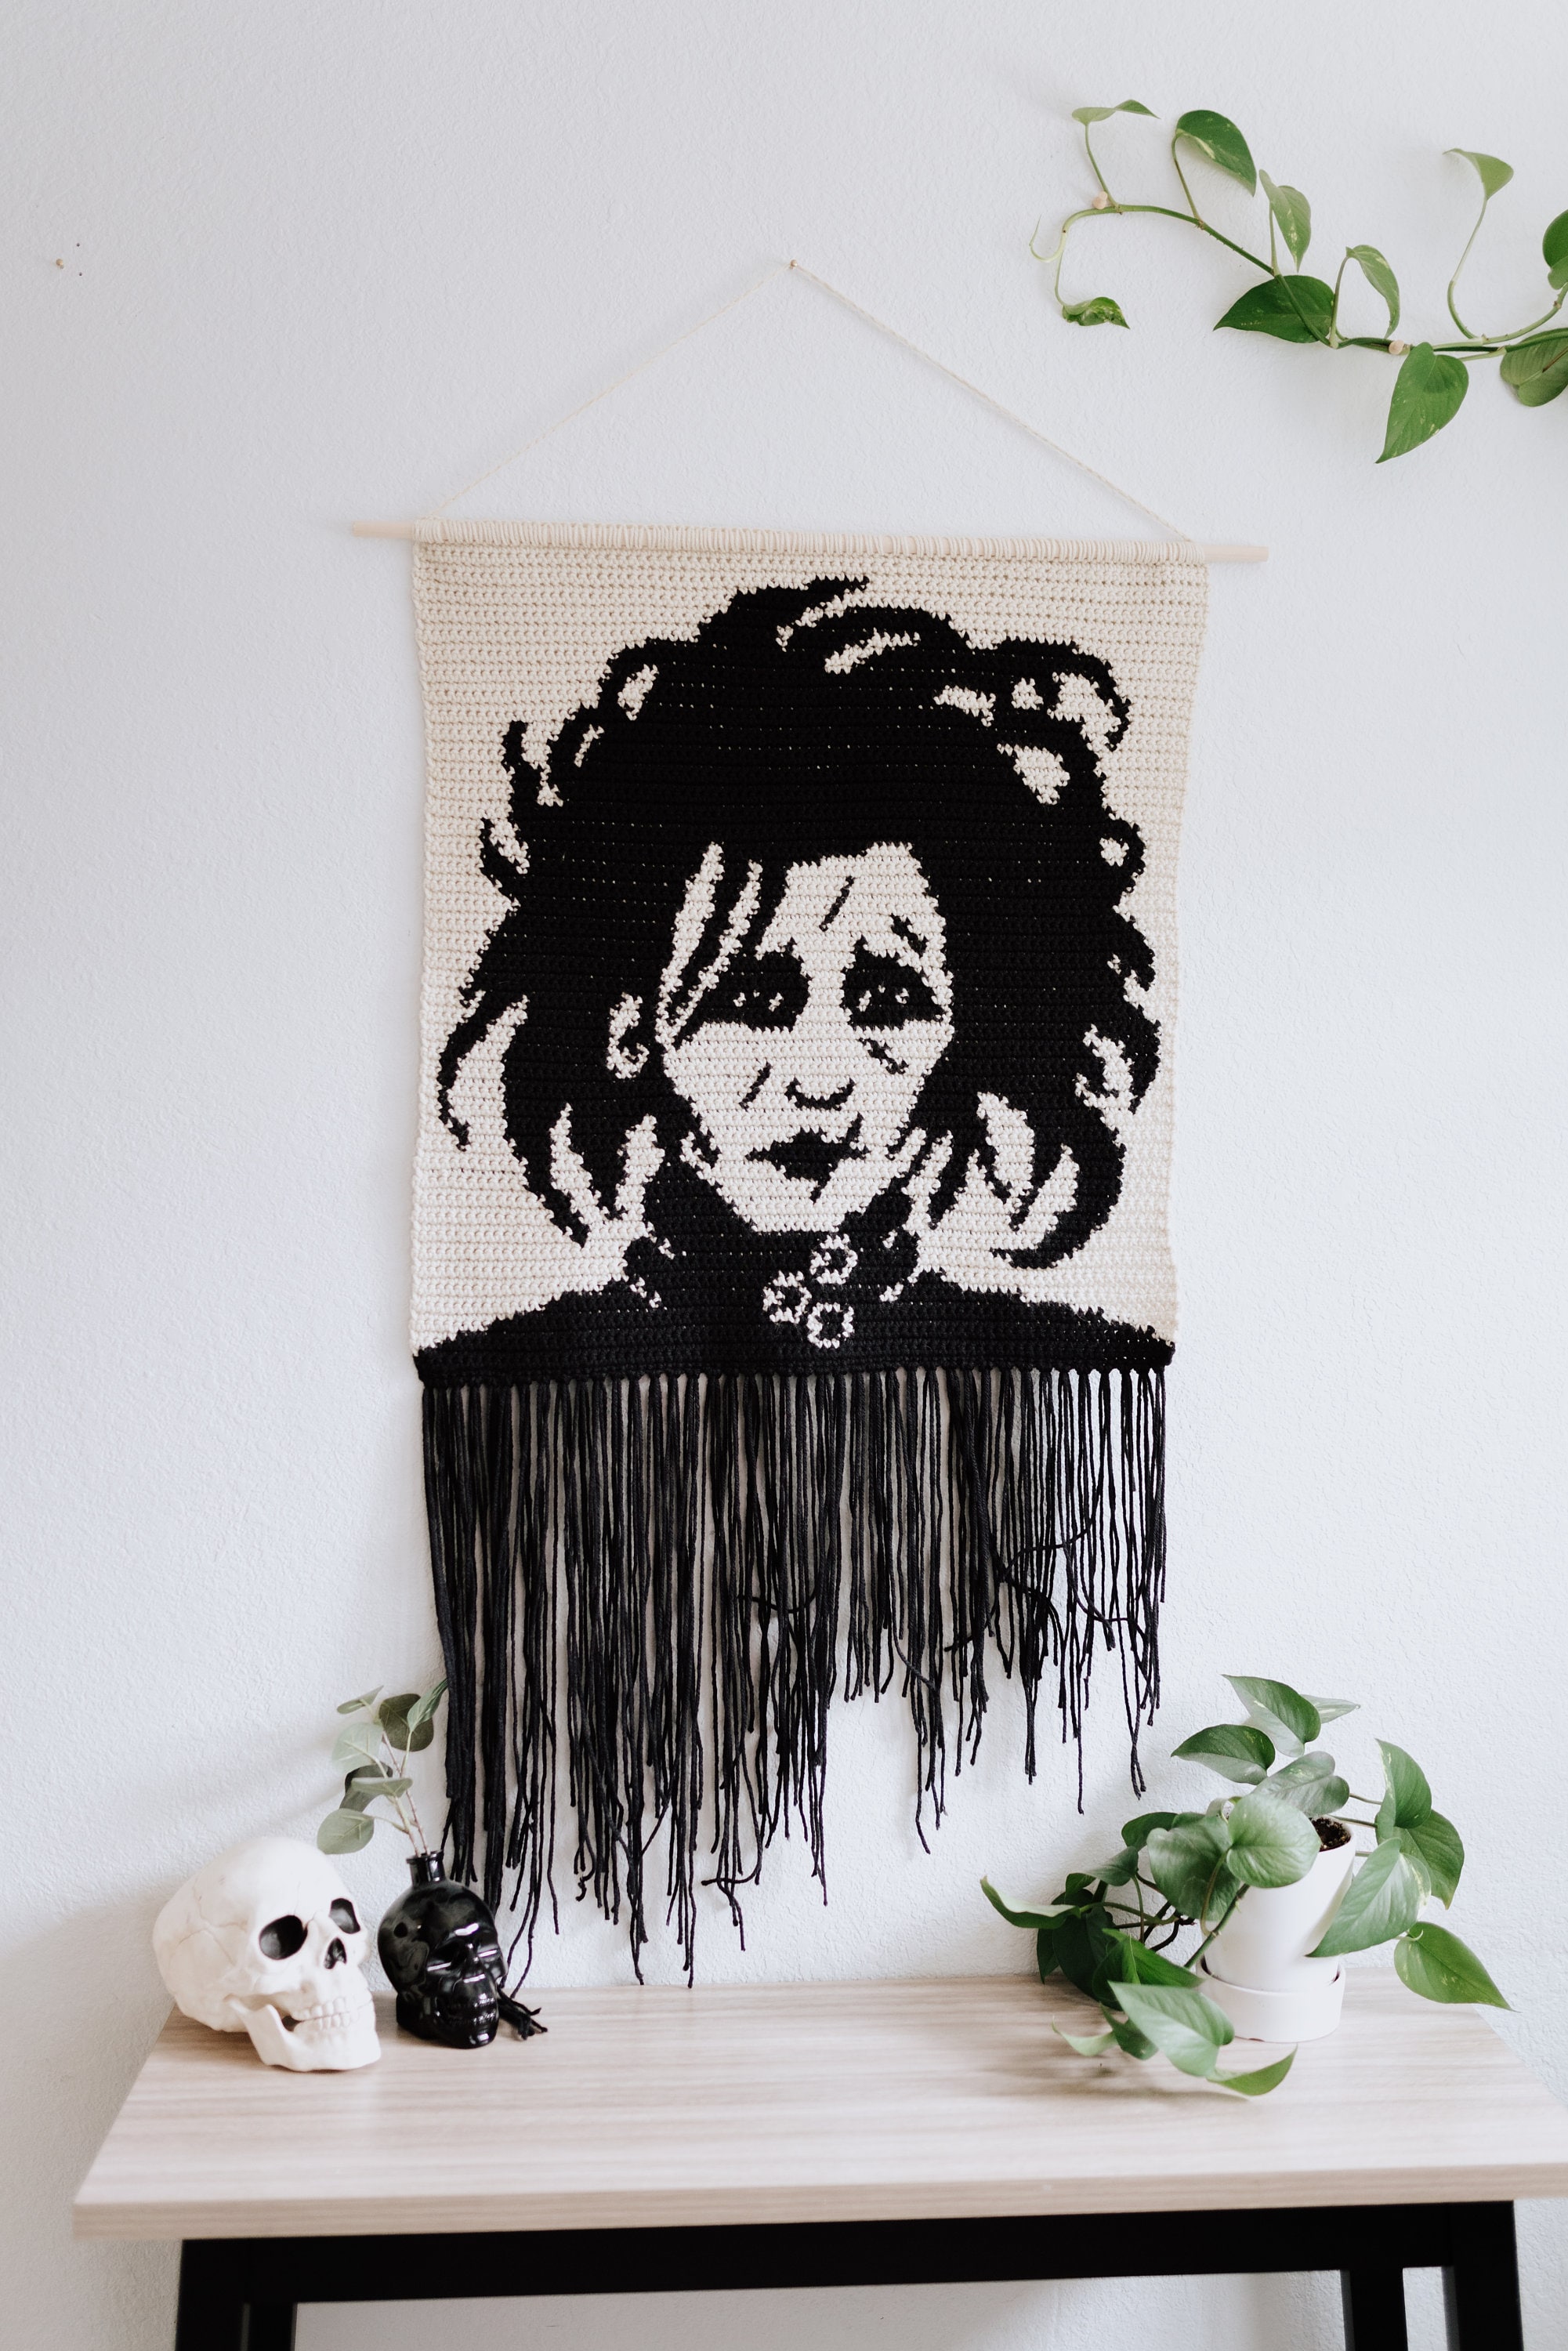 Goth Charms Tapestry for Sale by nevhada